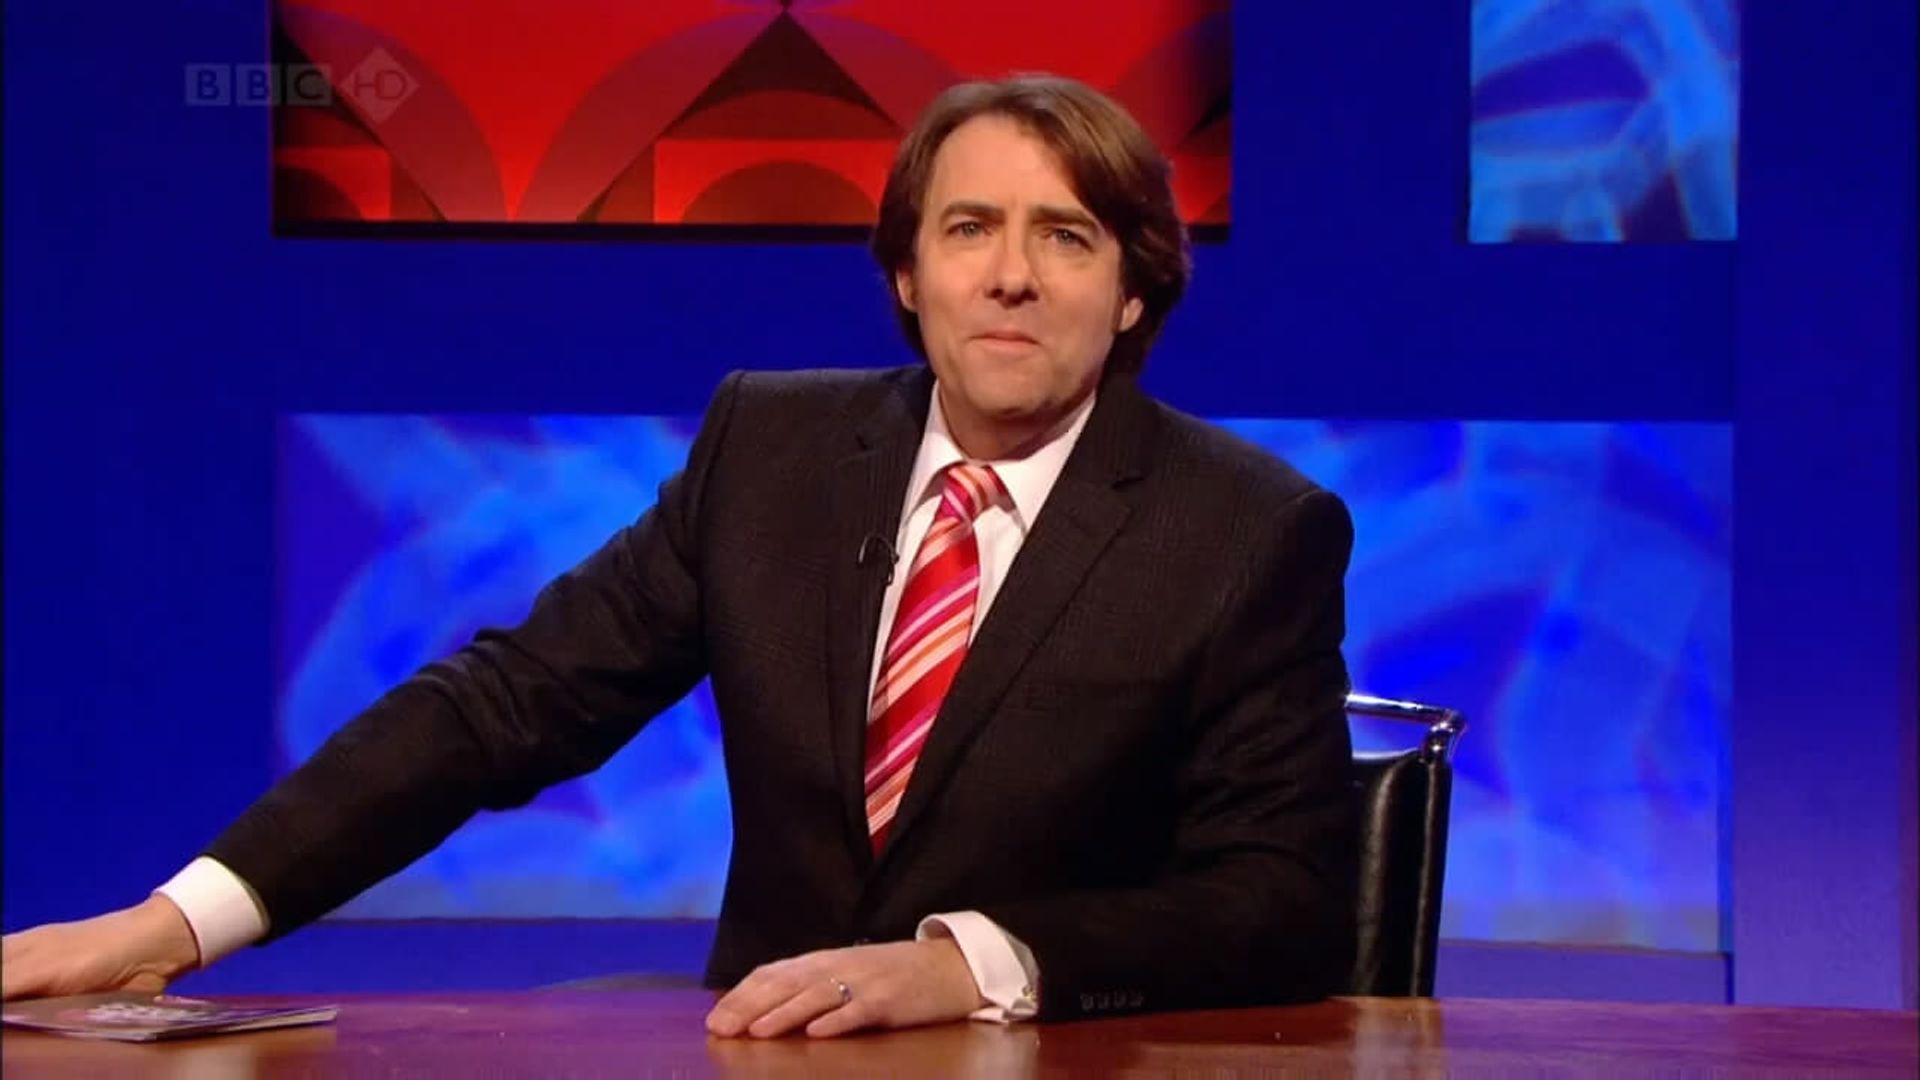 Friday Night with Jonathan Ross background